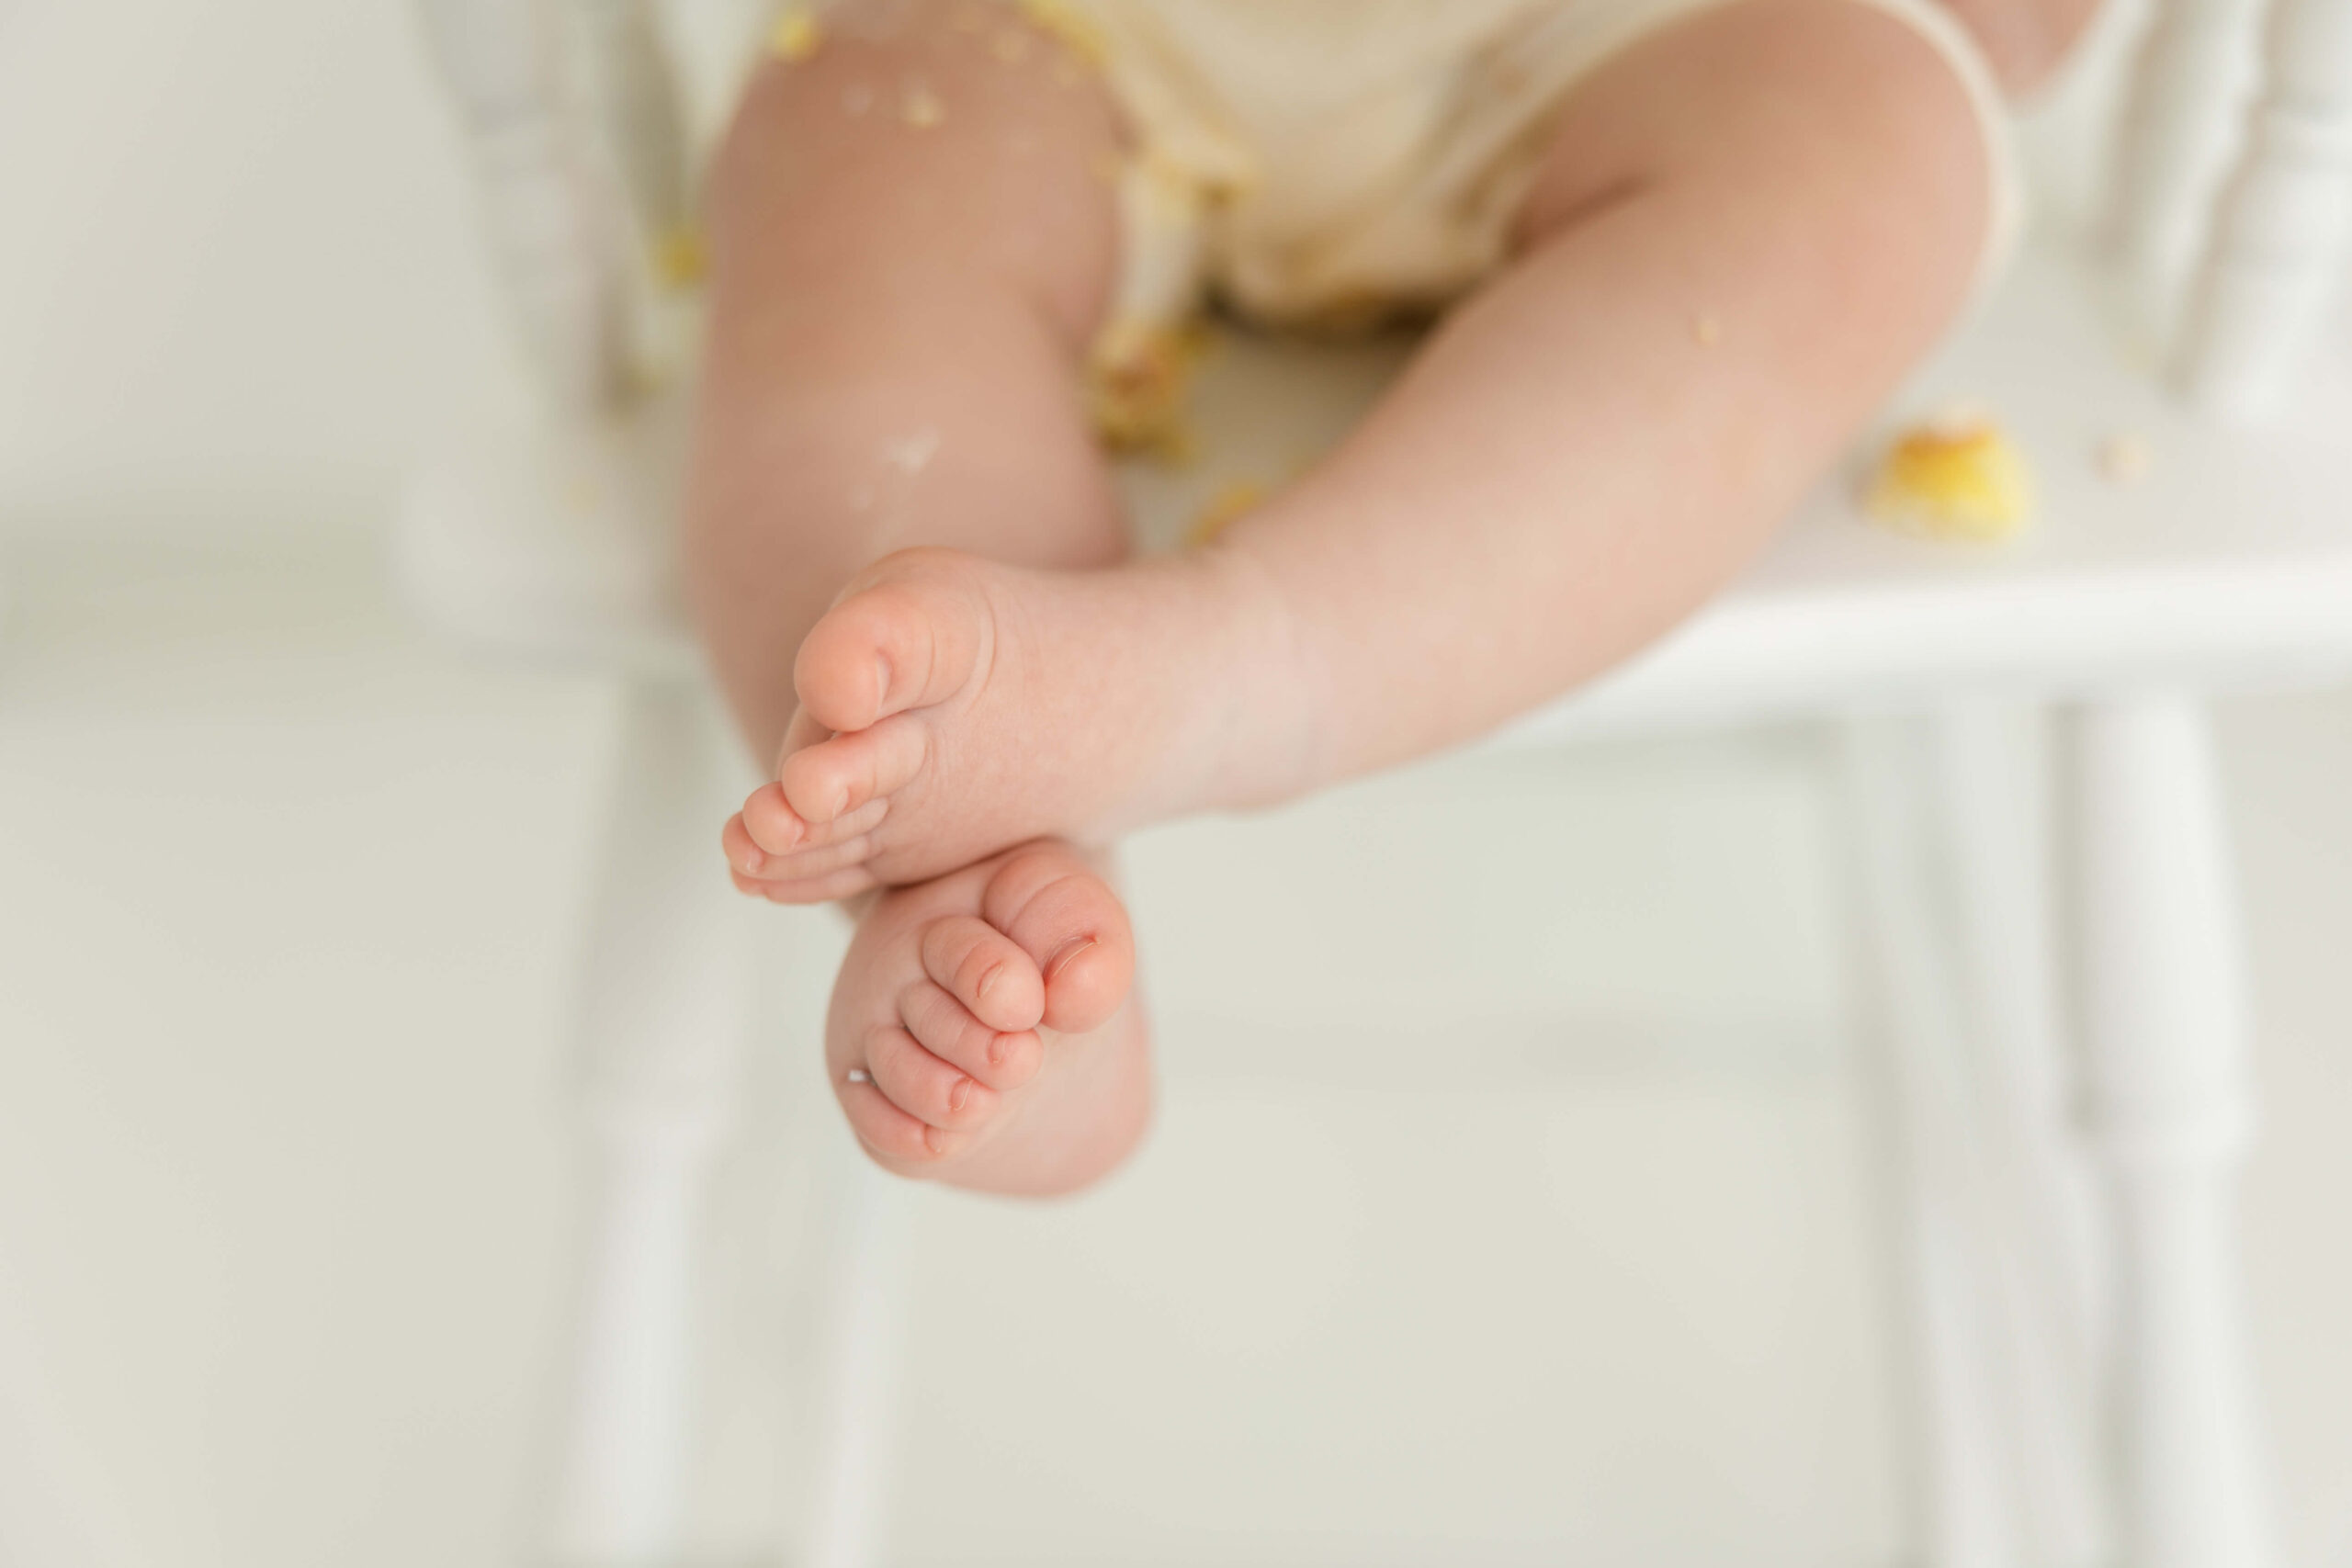 Close up image of baby boy toes, with just a little cake all around him.  